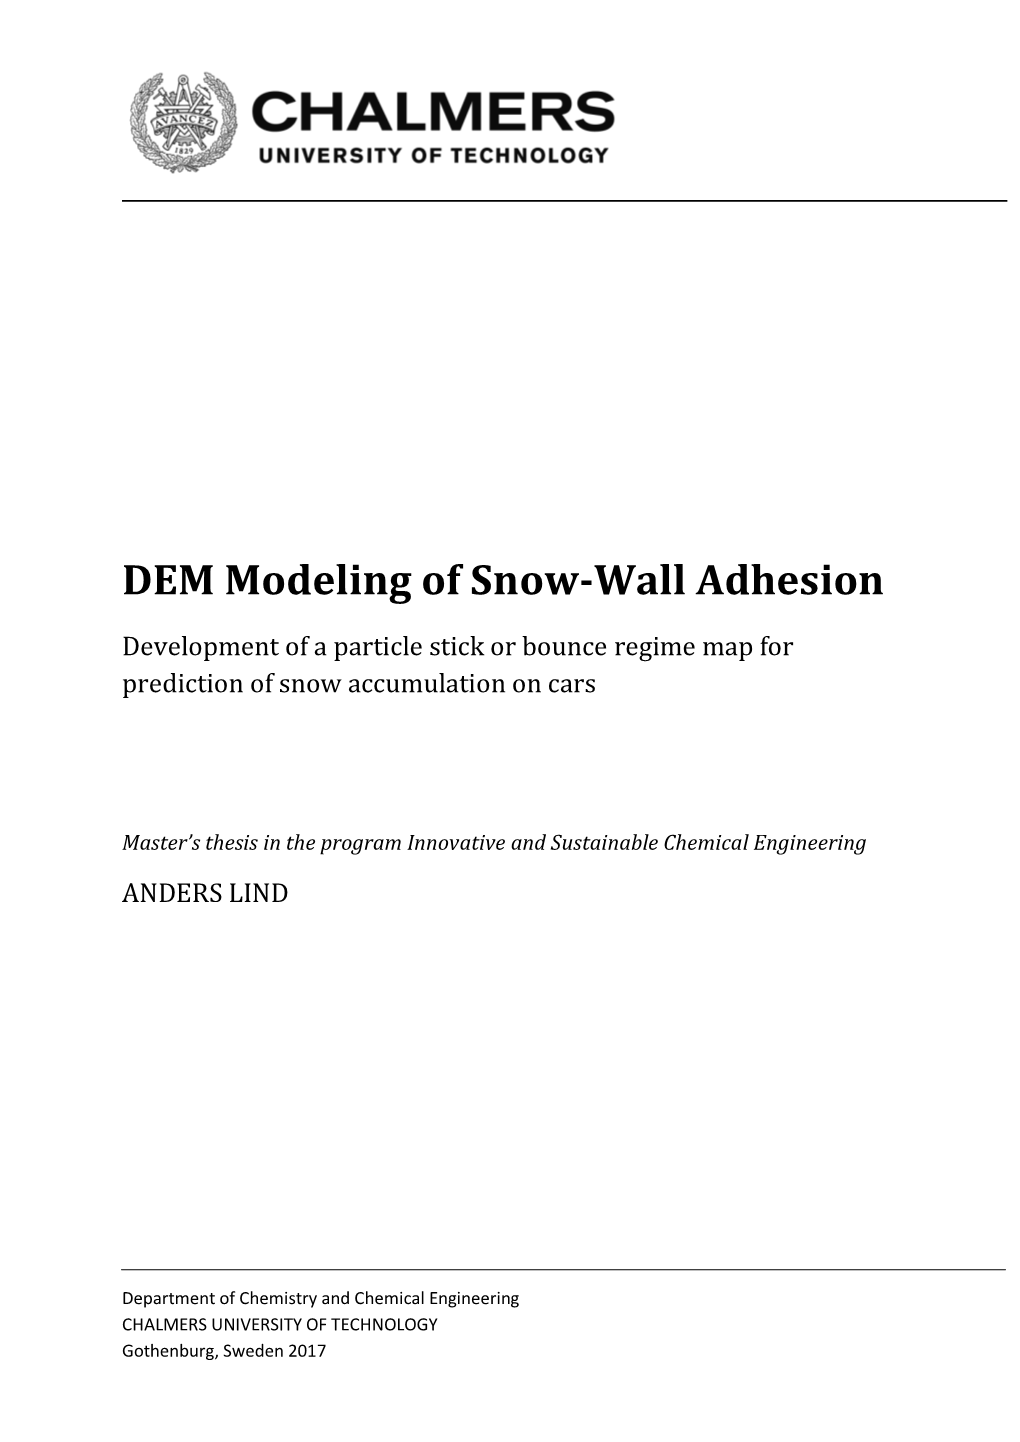 DEM Modeling of Snow-Wall Adhesion